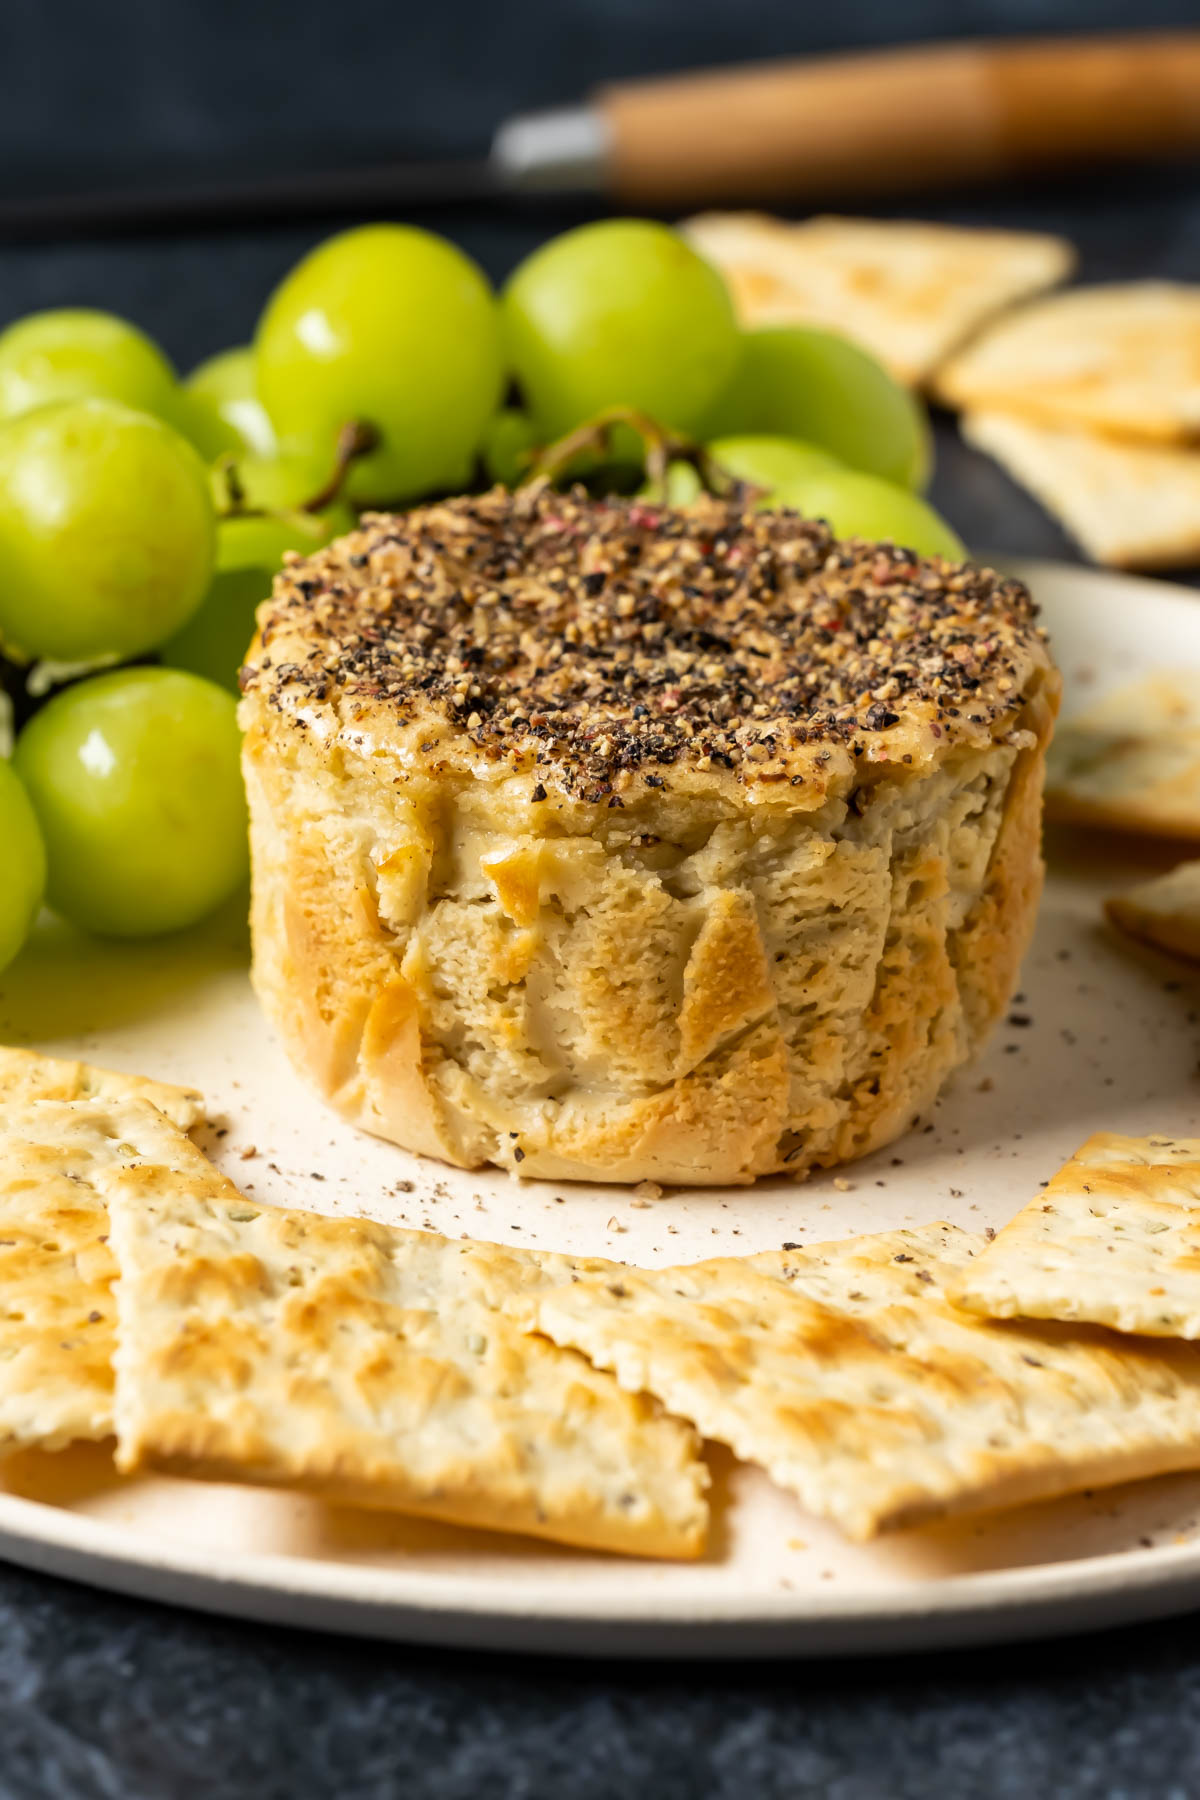 Vegan camembert on a white plate with crackers and grapes.